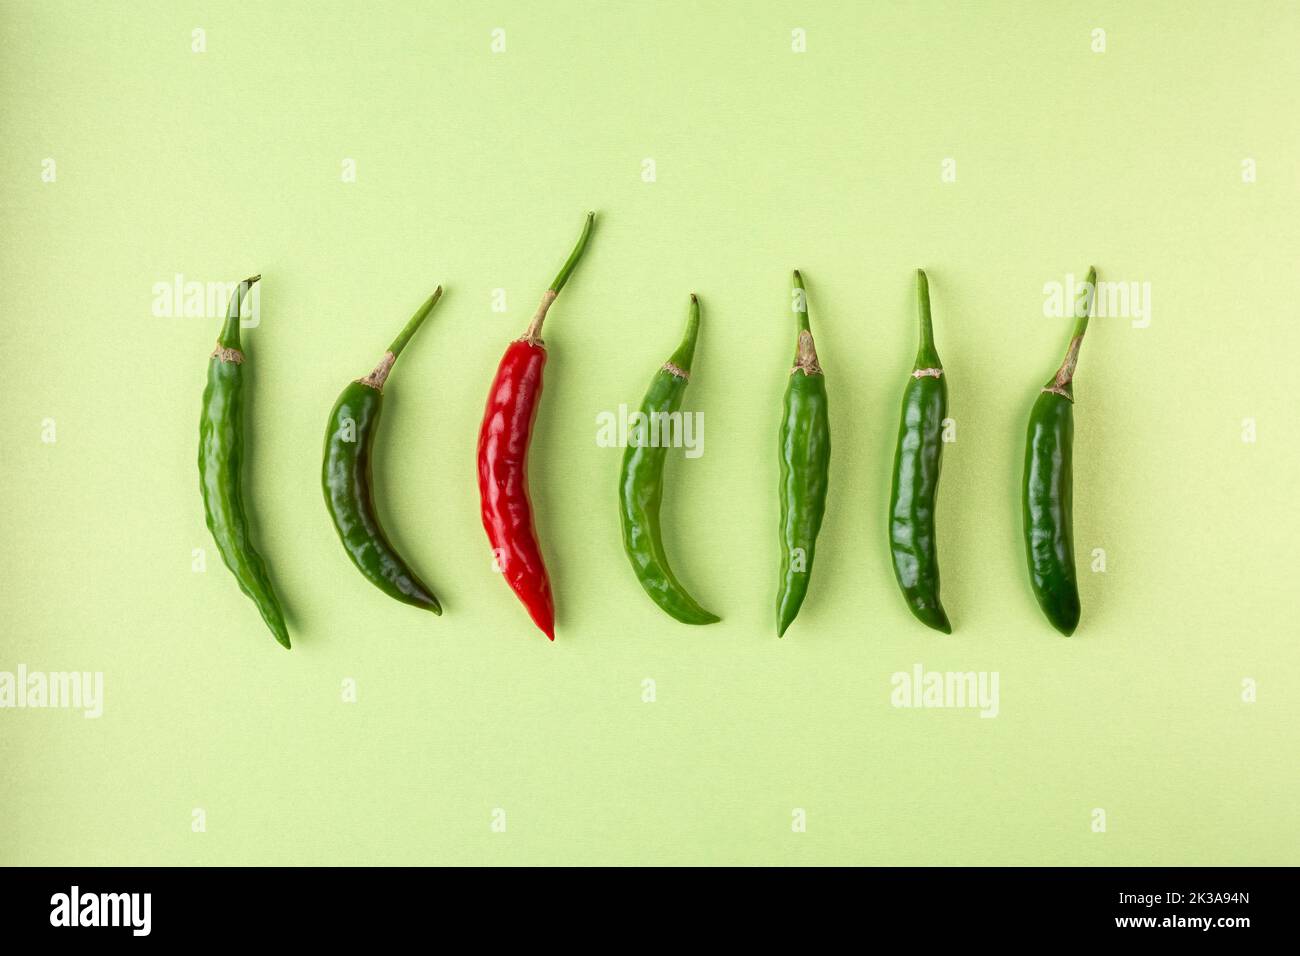 green and red chillies arranged on grainy textured light green background, ripe and unripe common vegetable used for their spicy taste Stock Photo